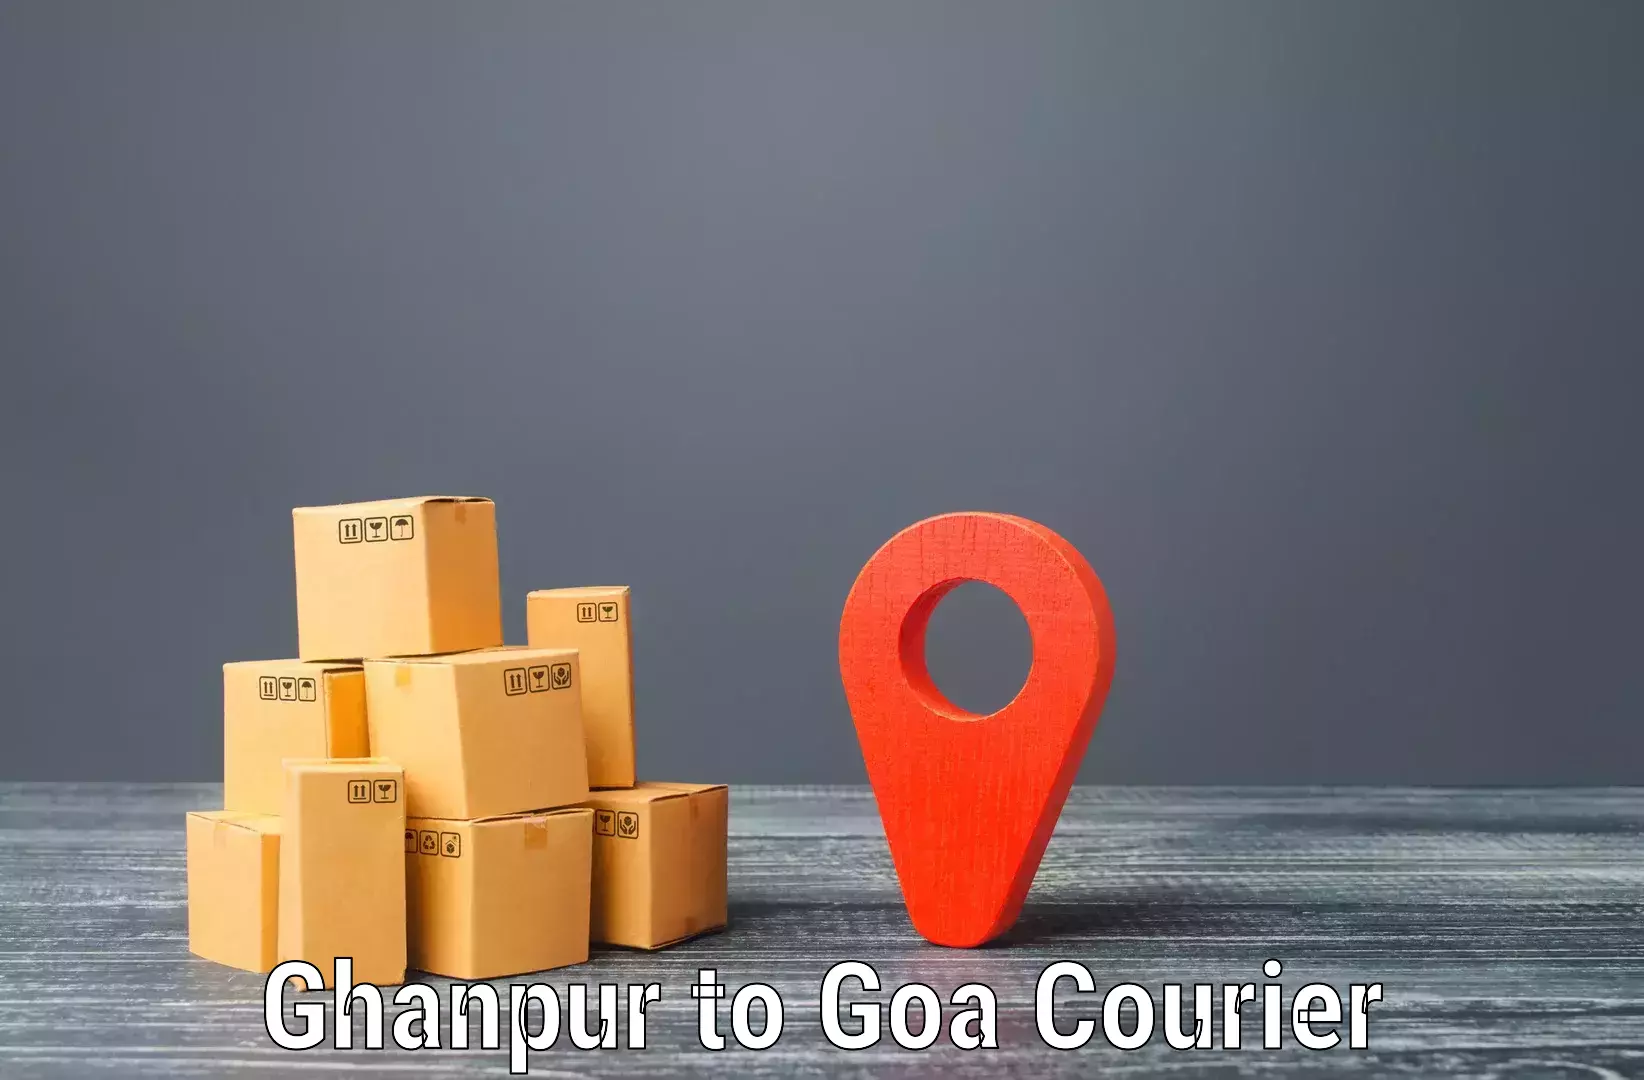 Multi-national courier services Ghanpur to Mormugao Port